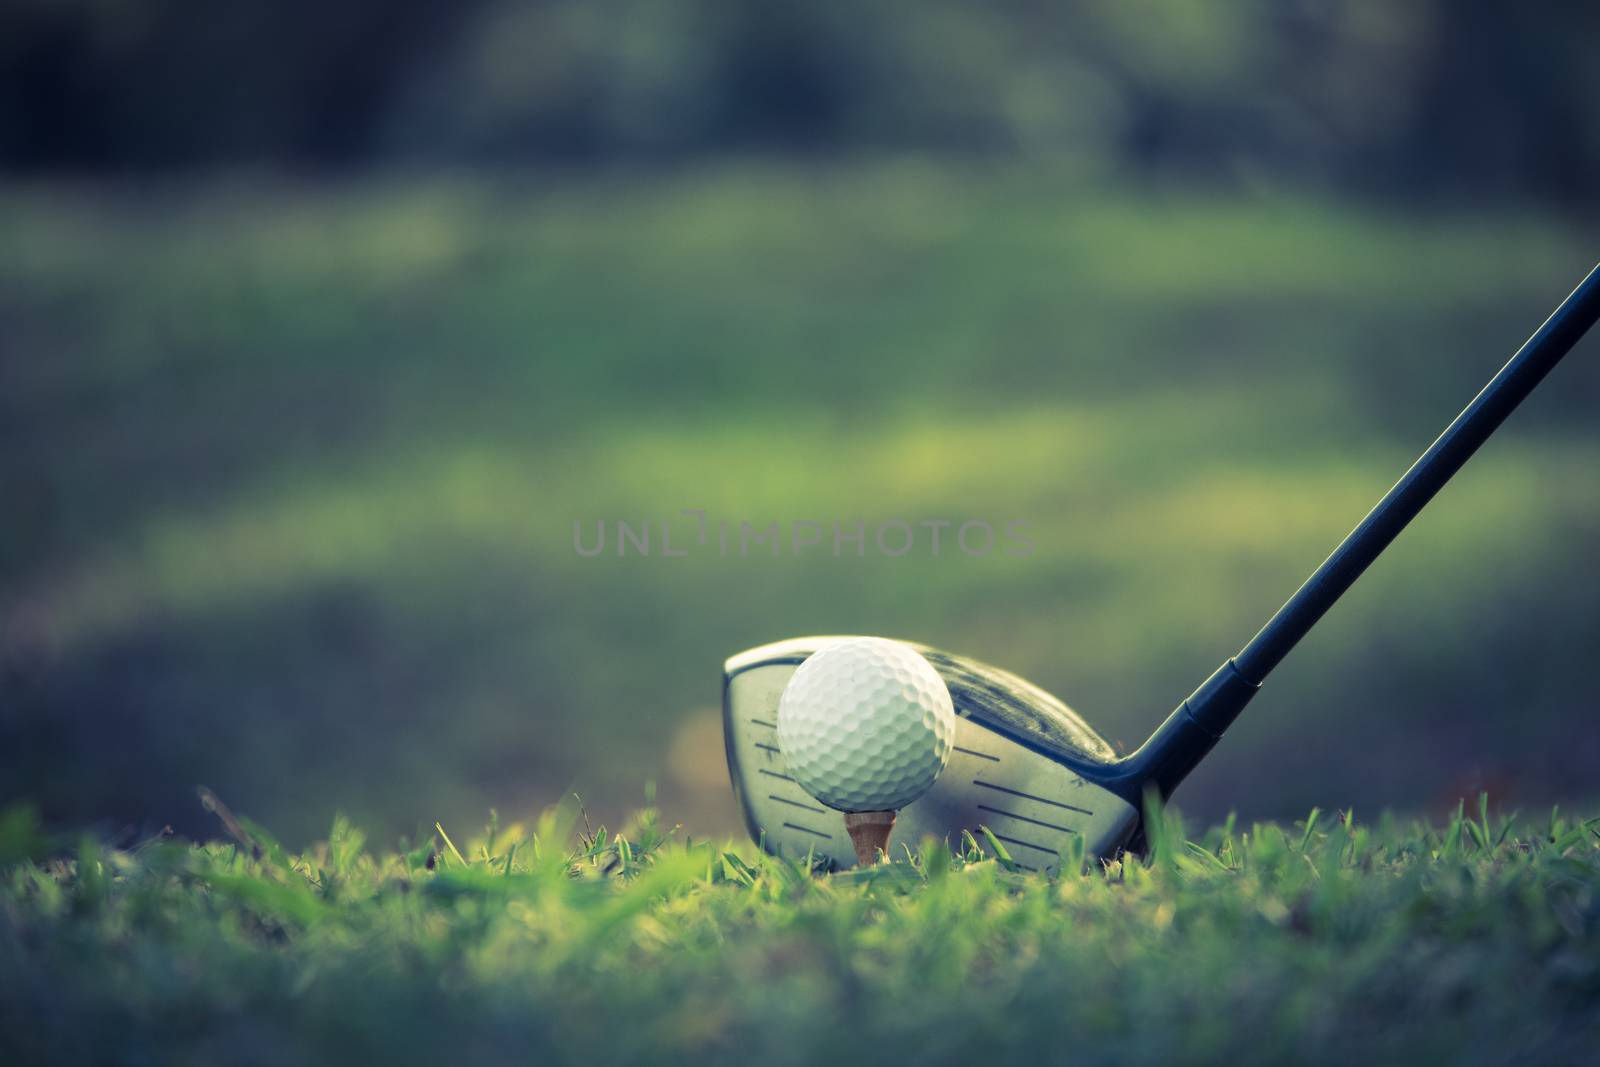 Close up of golf ball on a tee with golf club on the fairway.